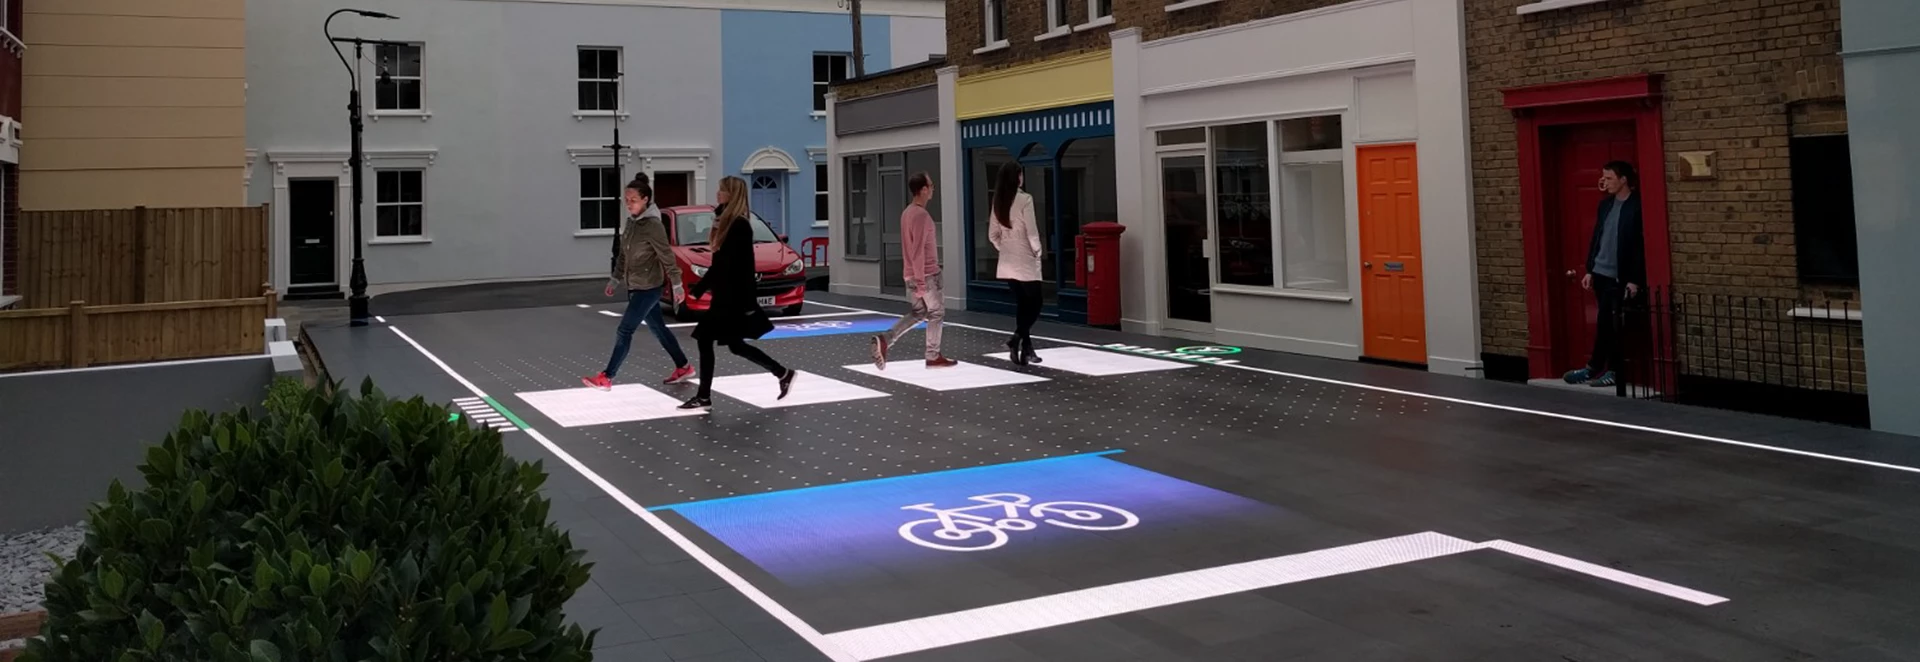 Interactive road crossing uses LEDs to alert road users 